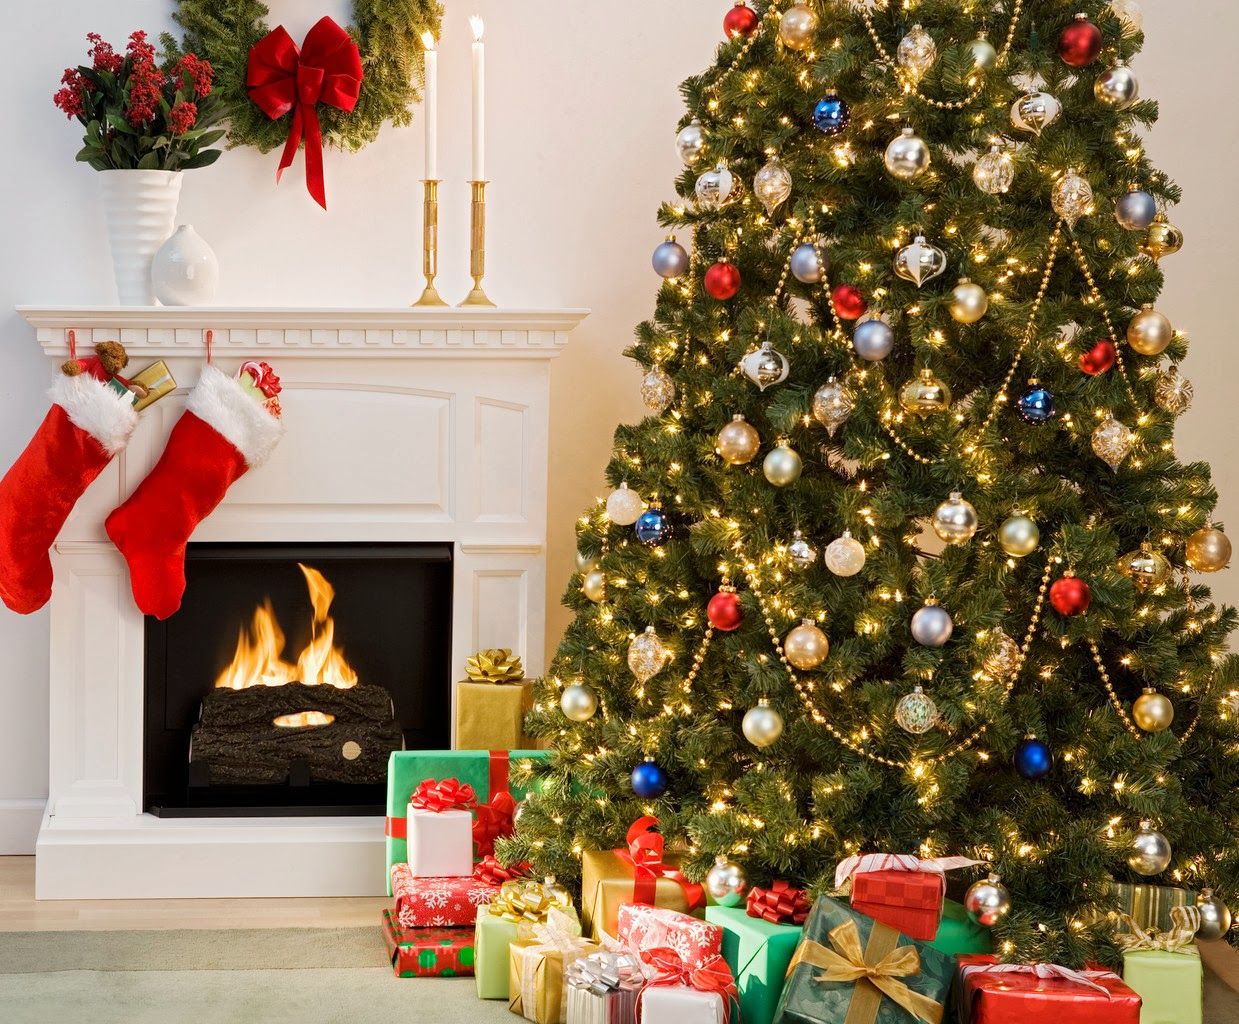 Wallpaper HD For Desktop Background: Christmas Tree With Presents